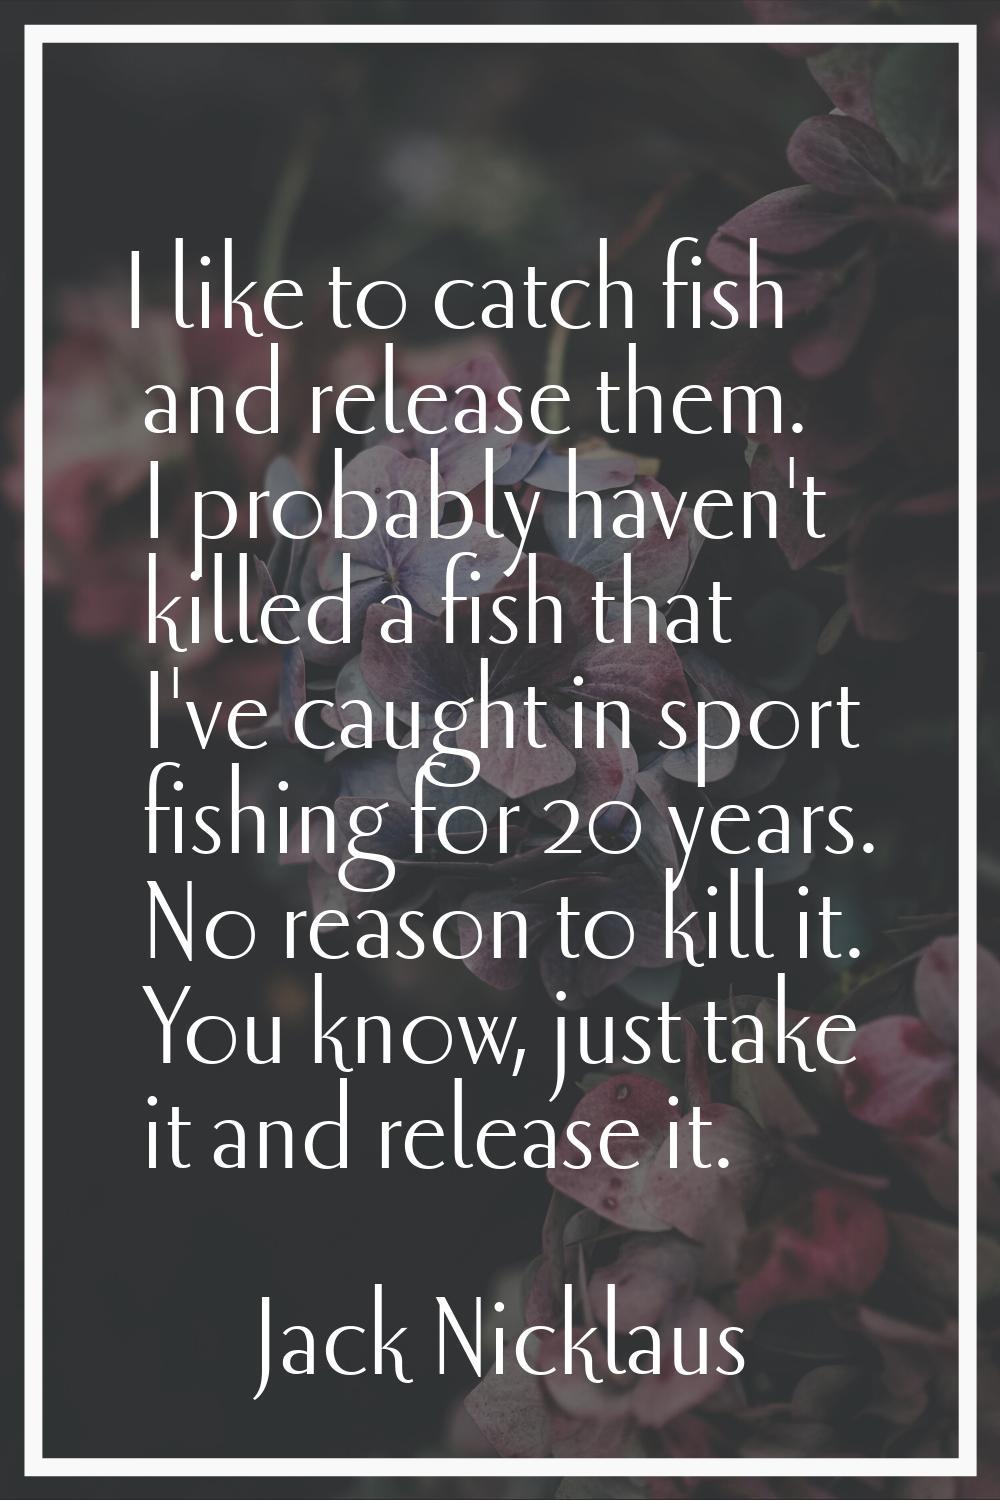 I like to catch fish and release them. I probably haven't killed a fish that I've caught in sport f